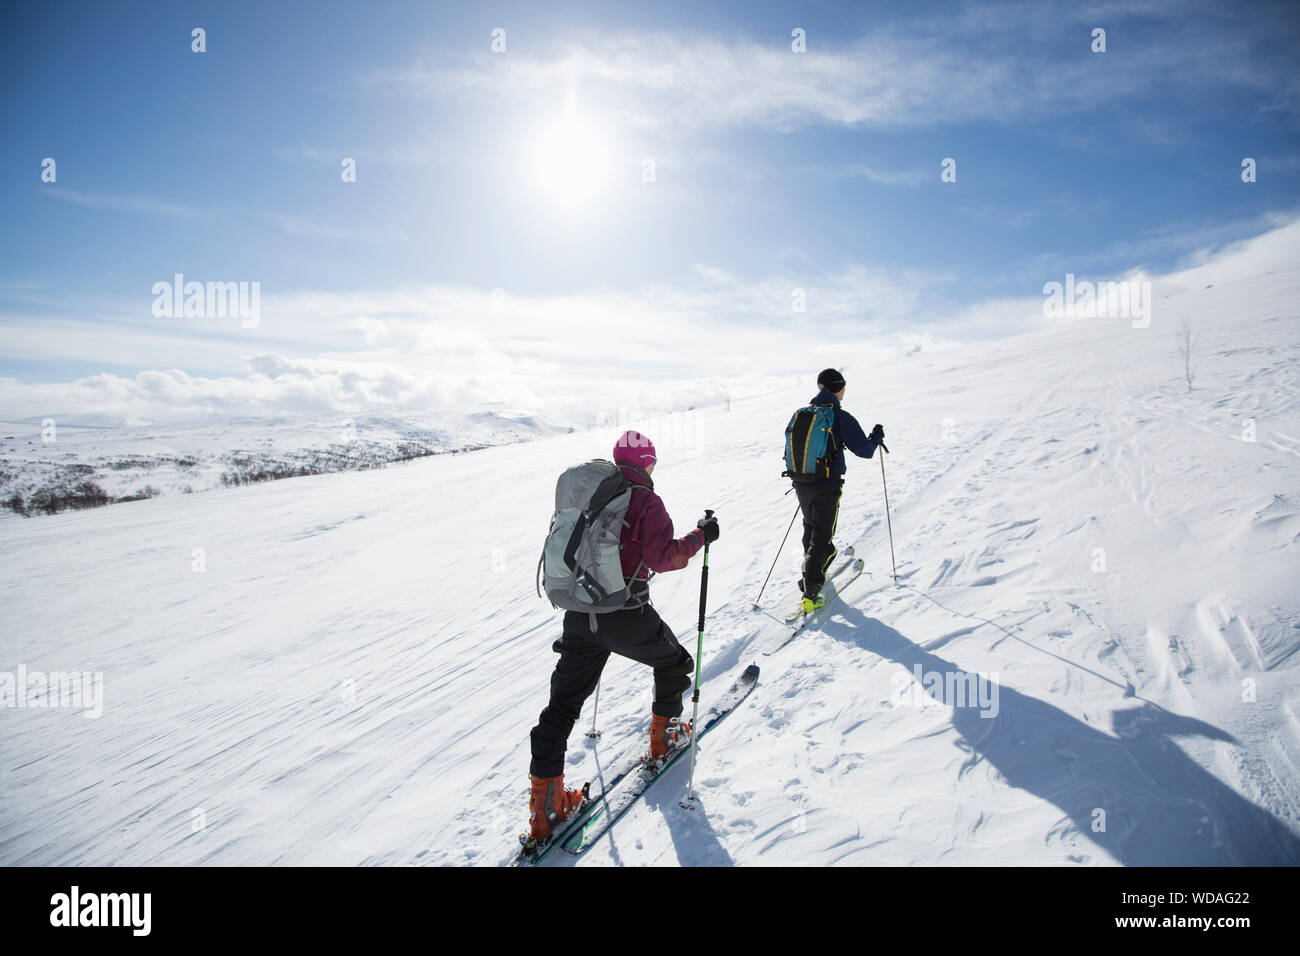 Two people cross country skiing Stock Photo